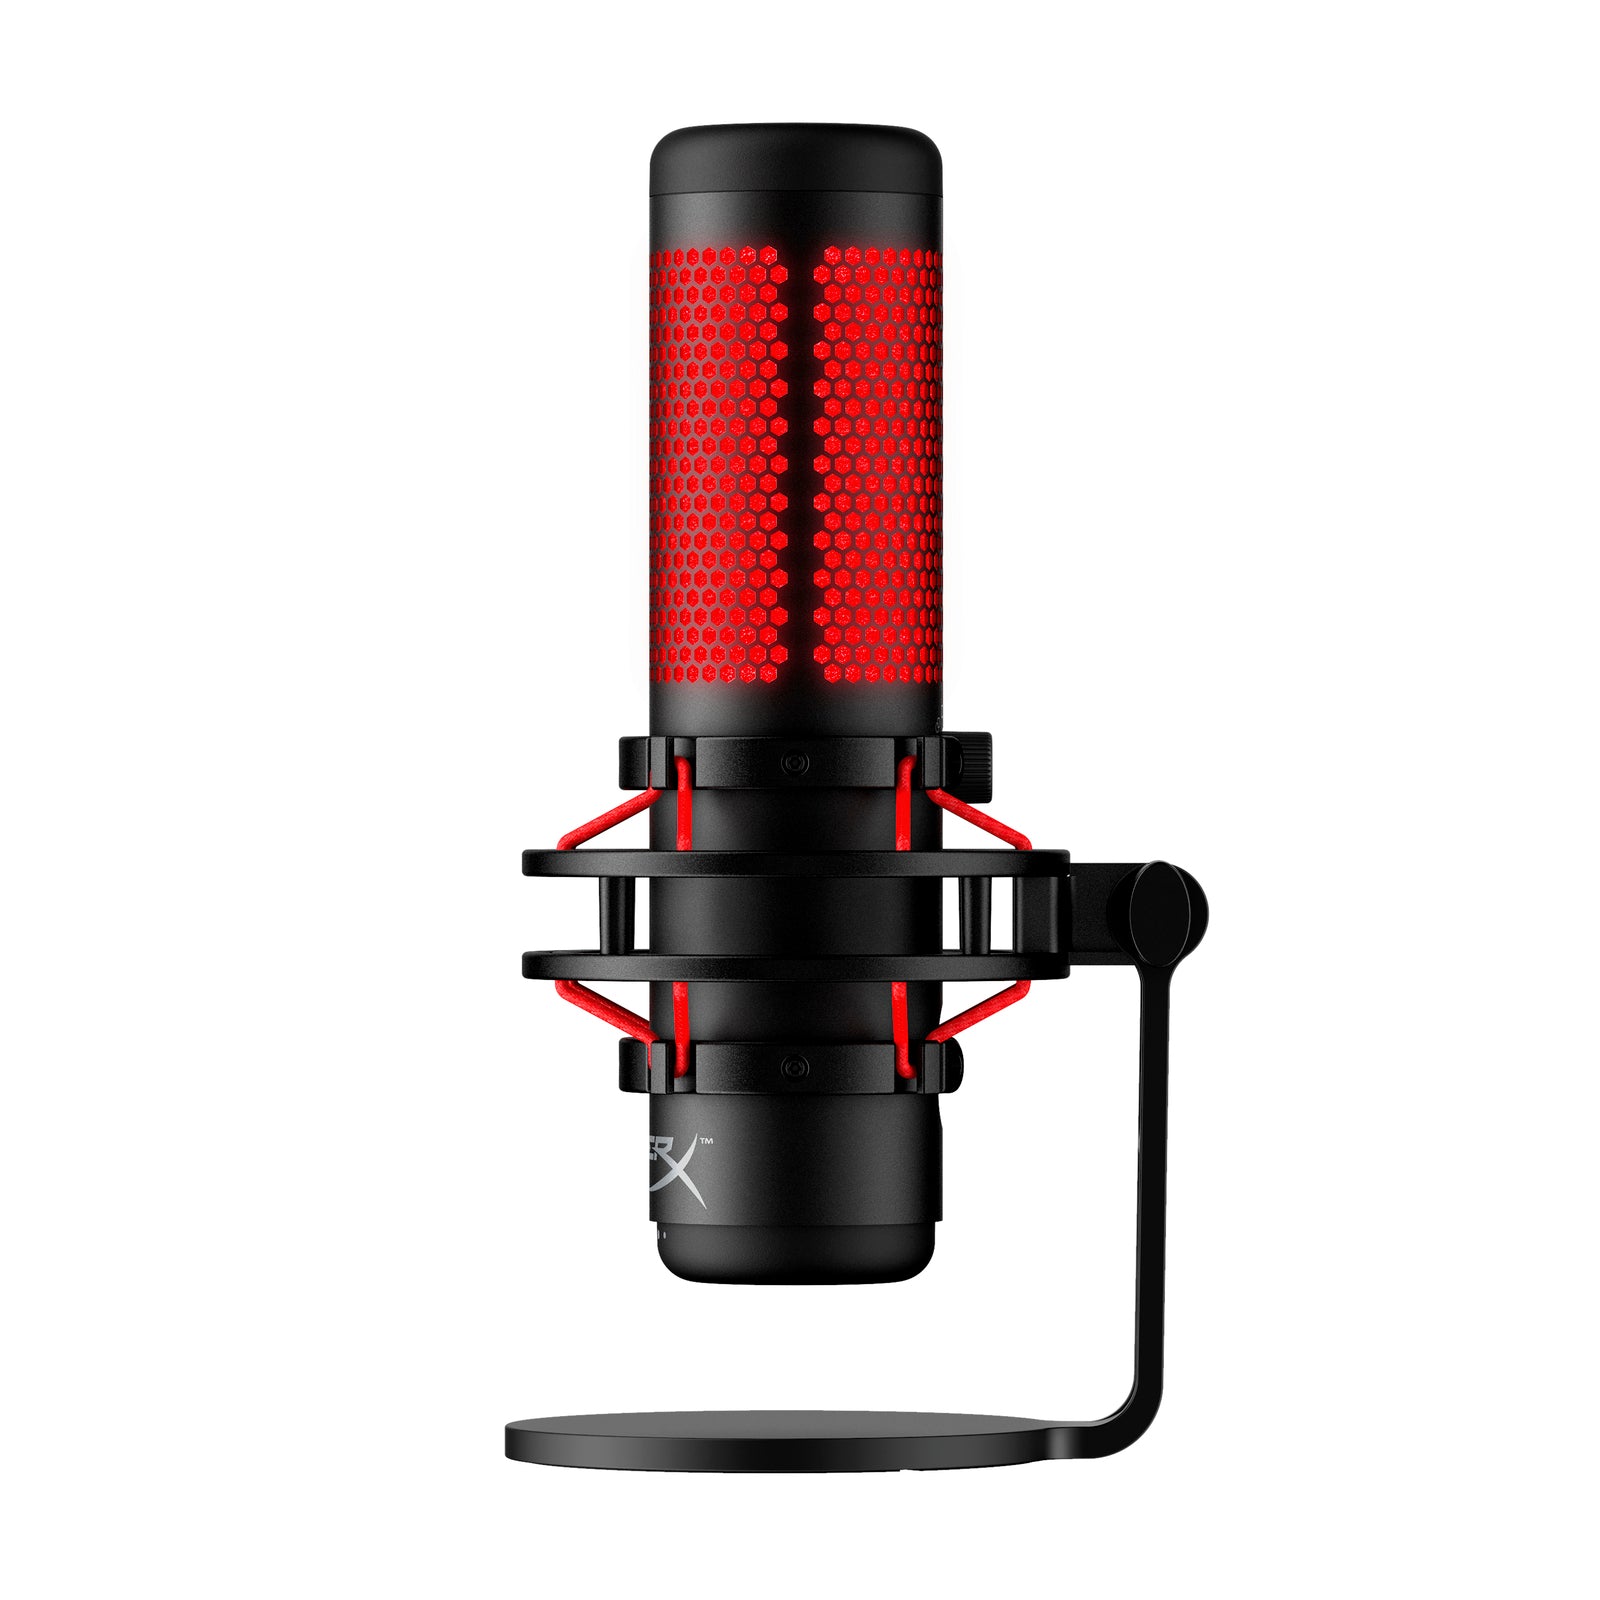 Side View of HyperX Quadcast USB Microphone with red lighting